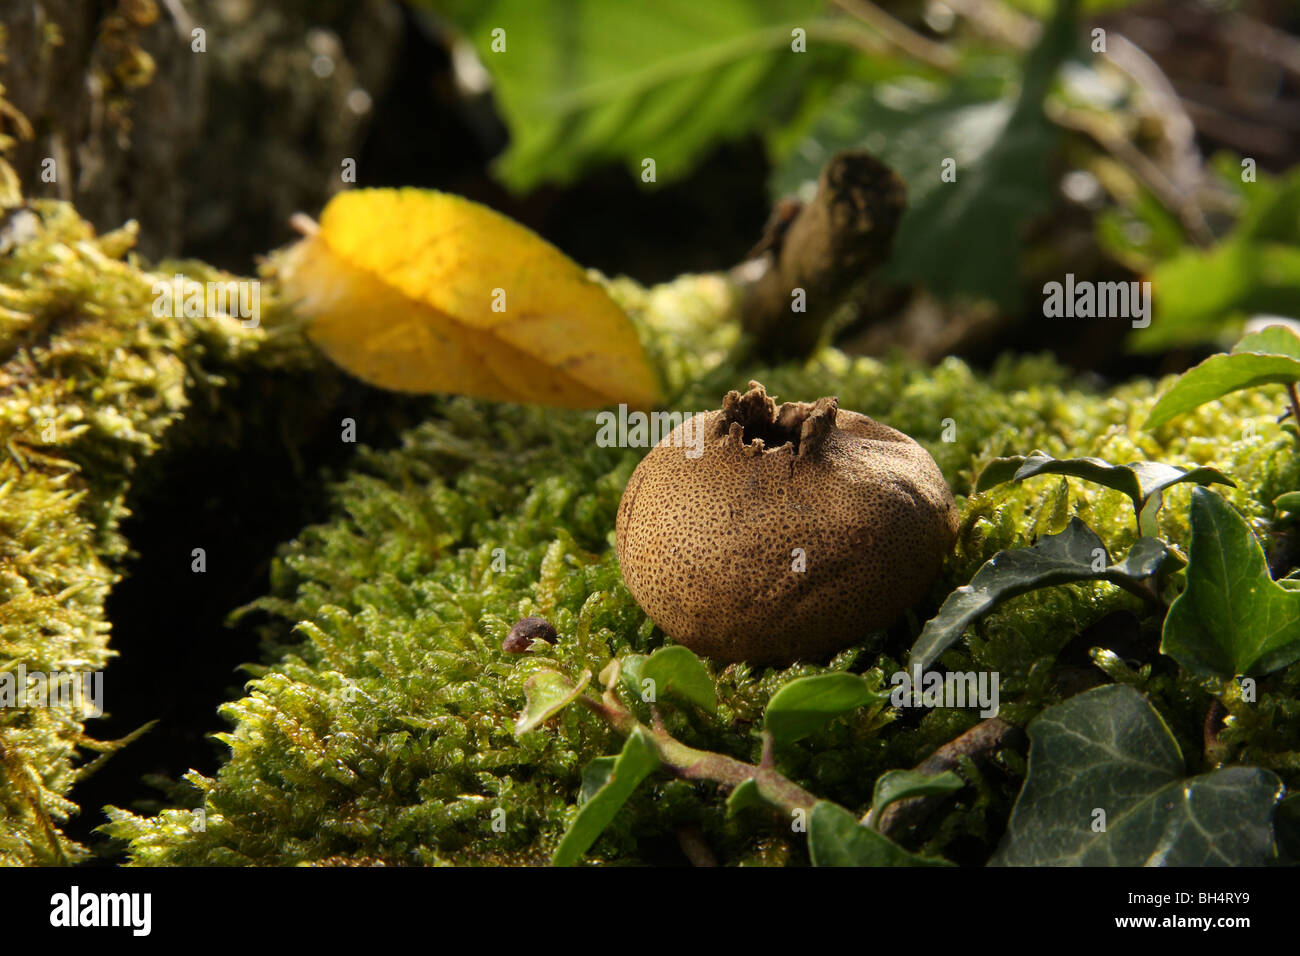 Puffball (Scleroderma areolatum) with its spore release hole open growing in moss in woodland. Stock Photo